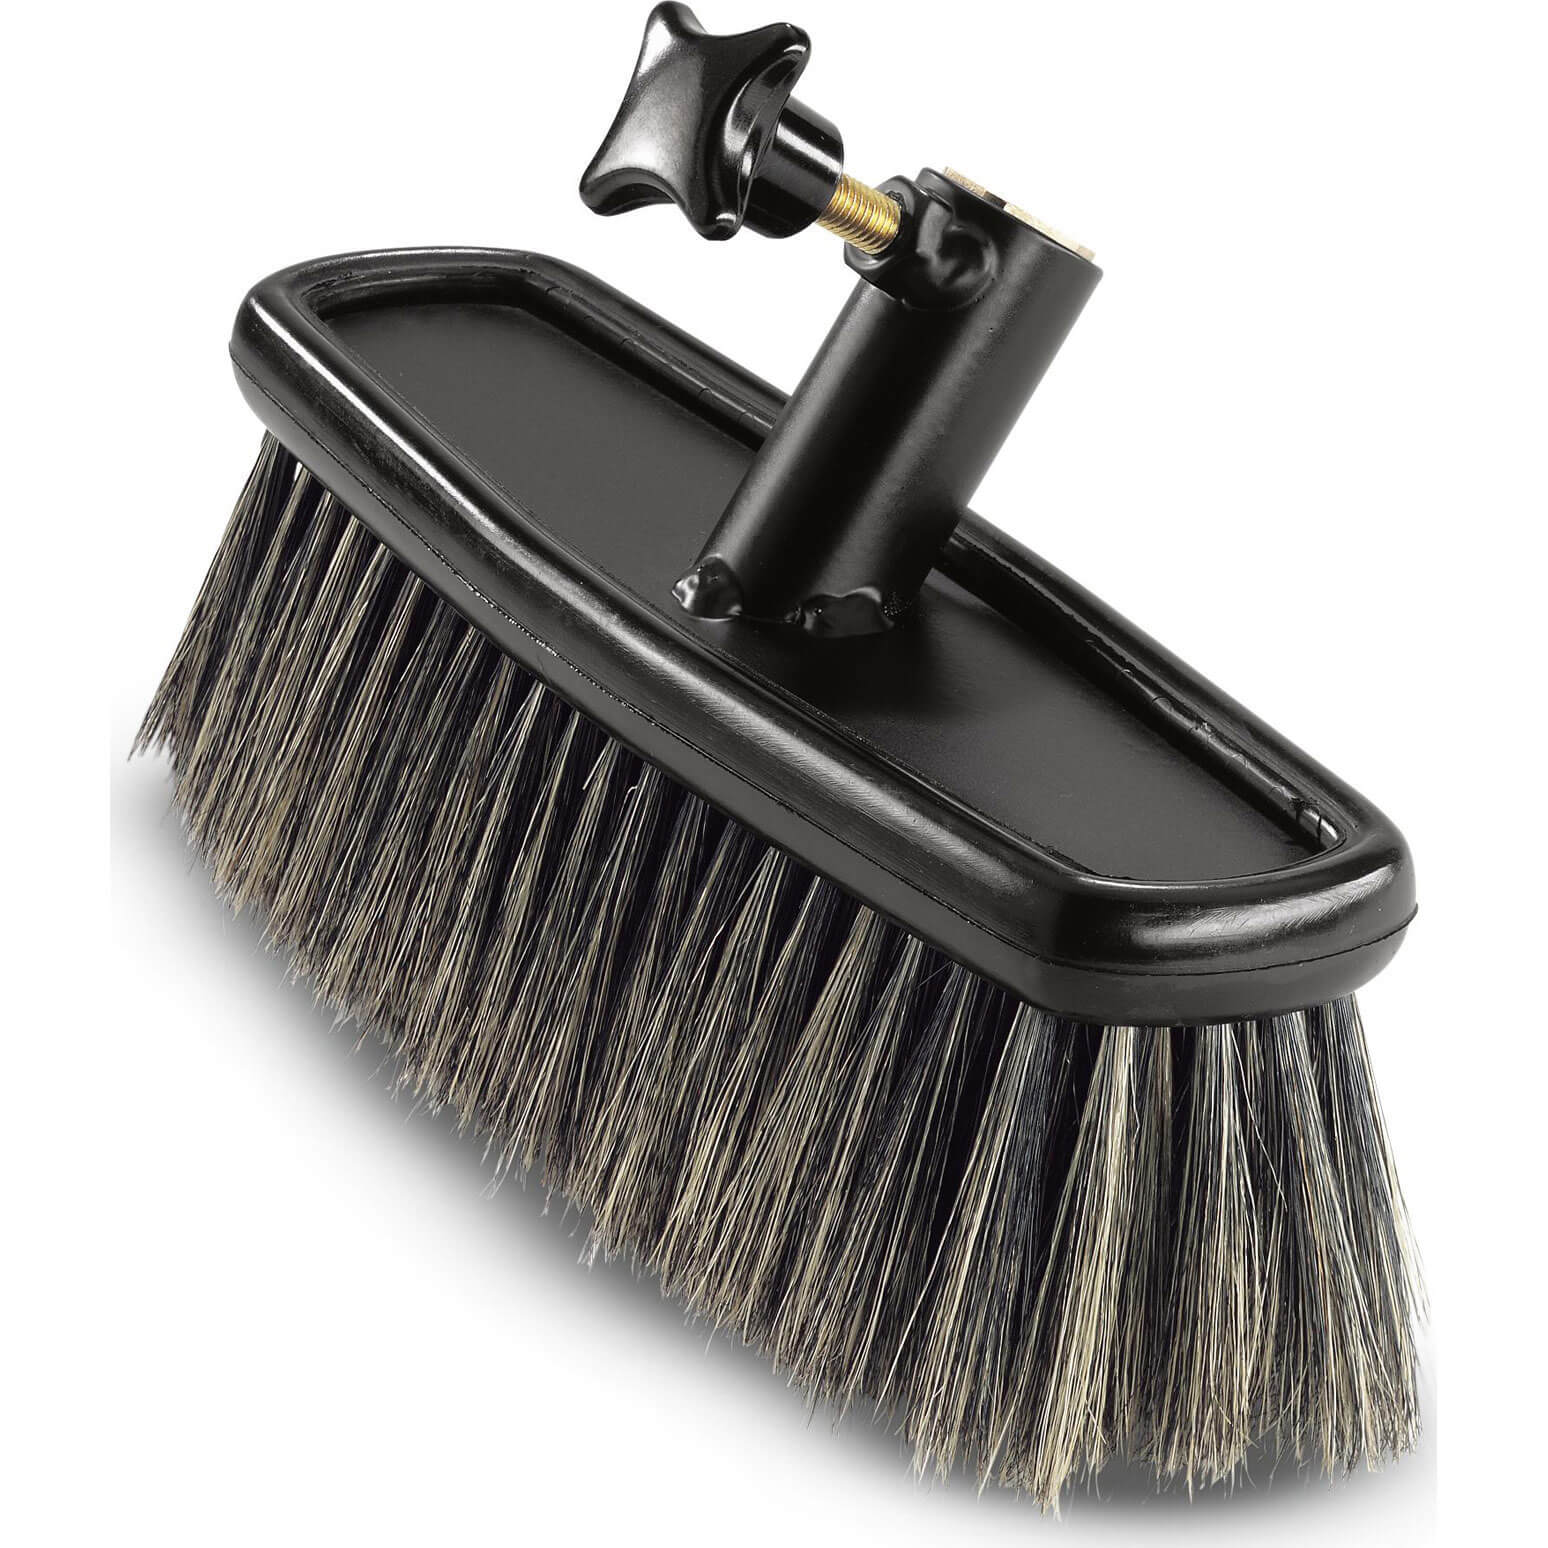 Karcher Basic Natural Wash Brush for HD and XPERT Pressure Washers (Not Easy!Lock)